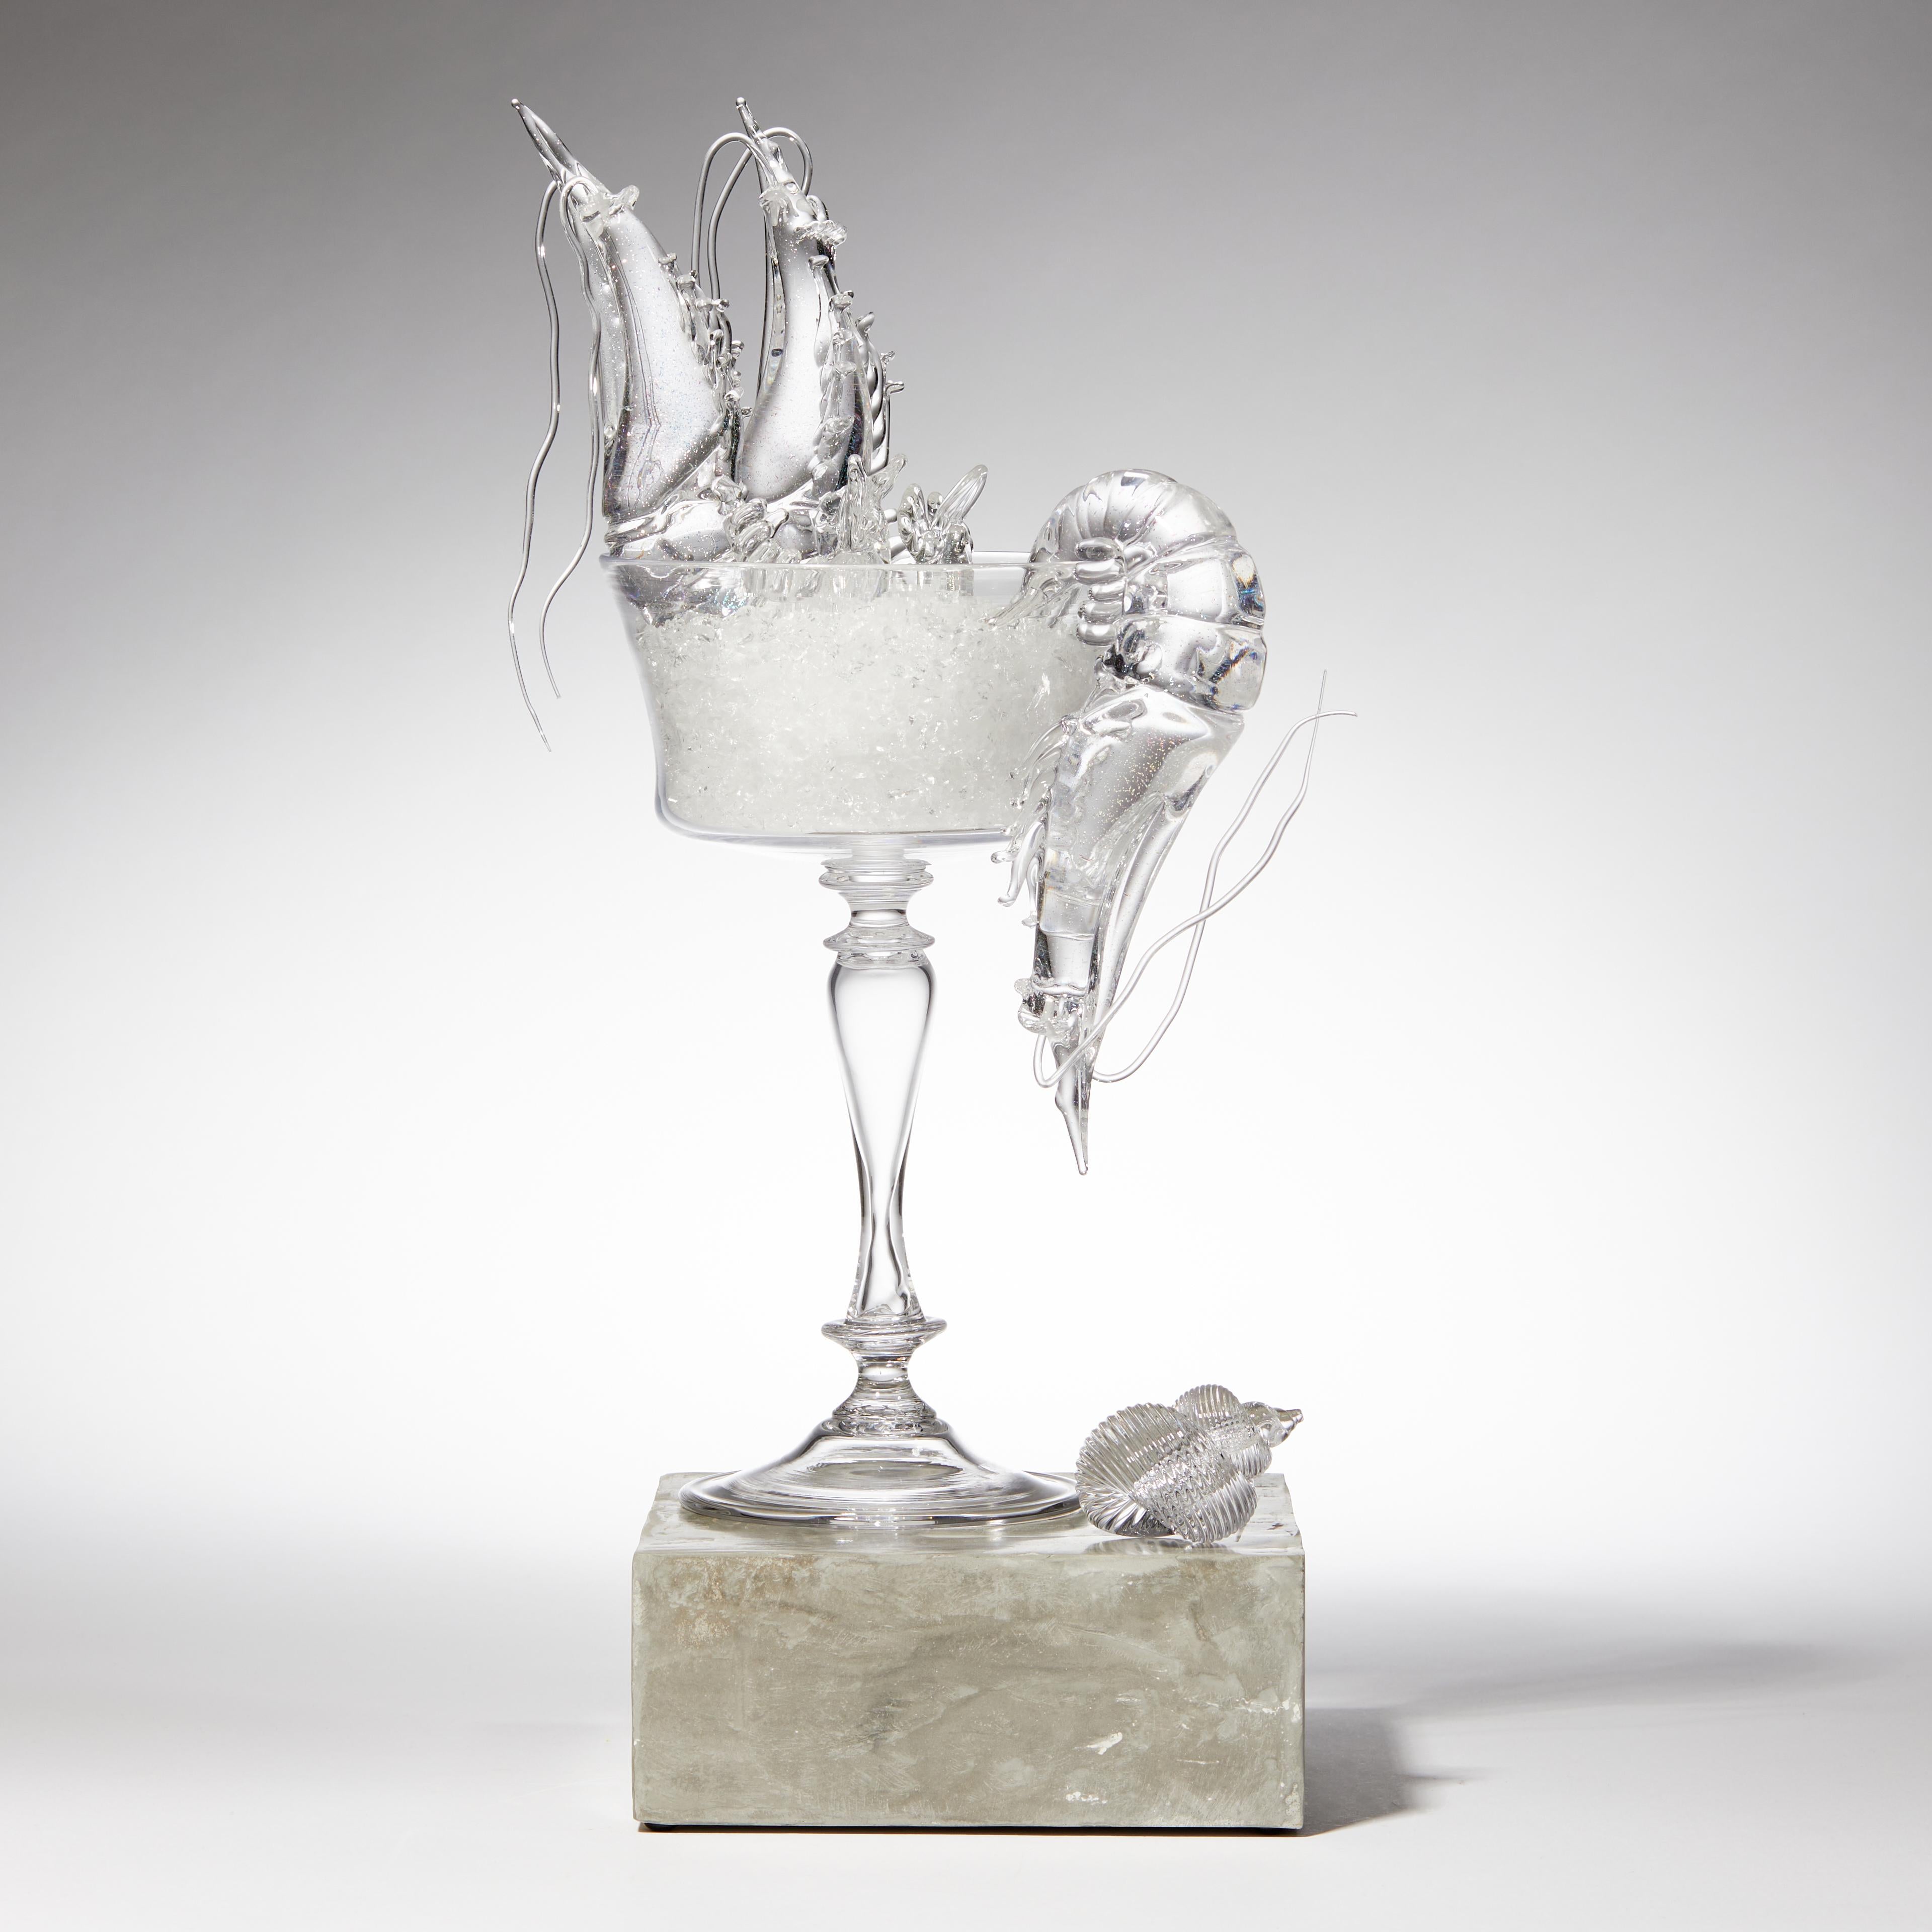 Still life with shrimp, is one of the British artist Elliot Walker's ongoing body of unique still life artworks. Freehand sculpted in clear glass with iridescent detail, the piece incorporates an elegant goblet filled with prawns and crushed ice